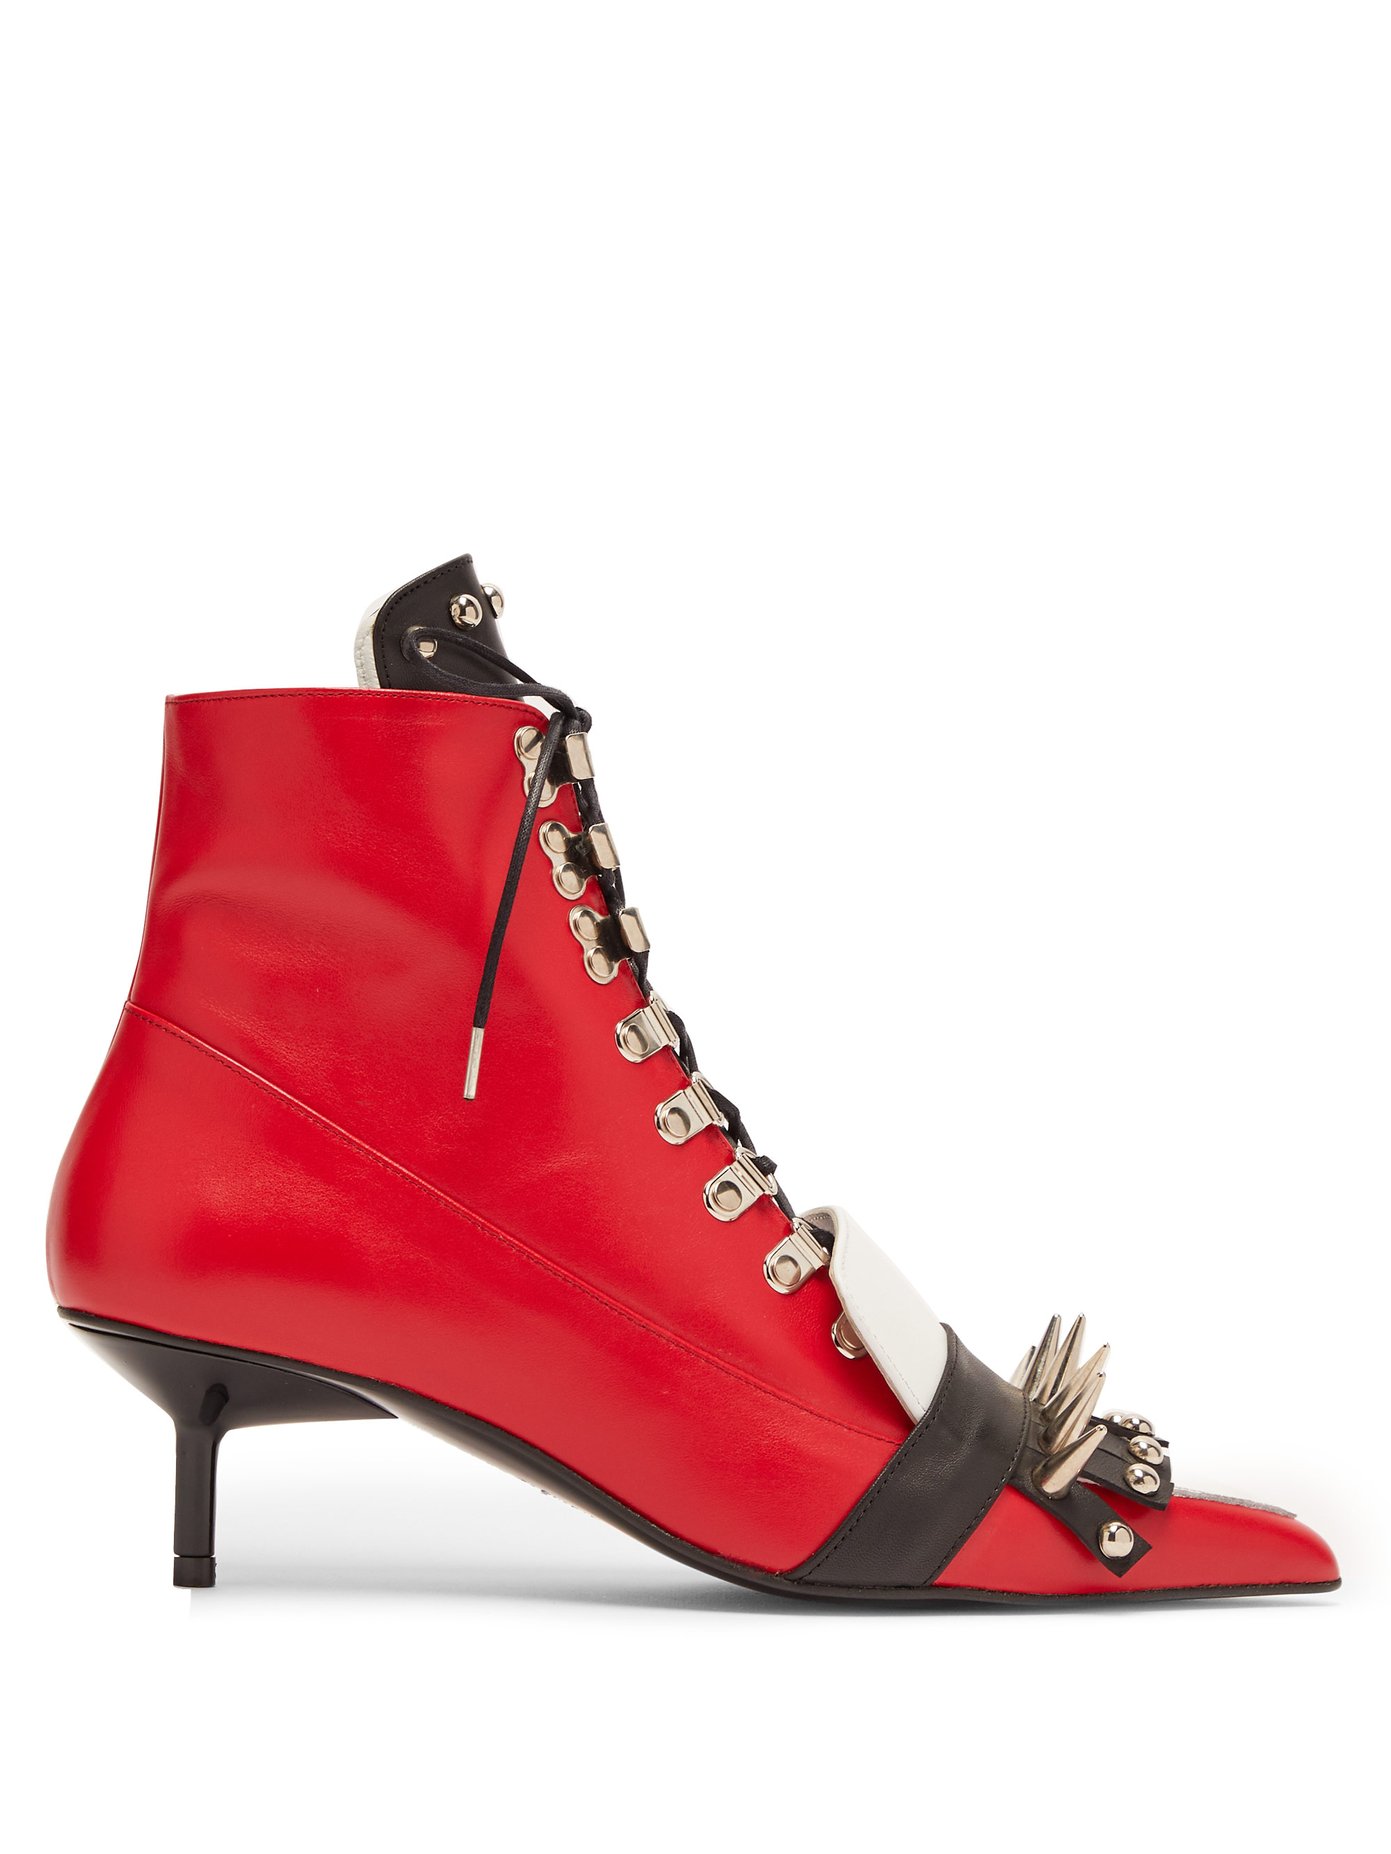 red leather kitten heel boots